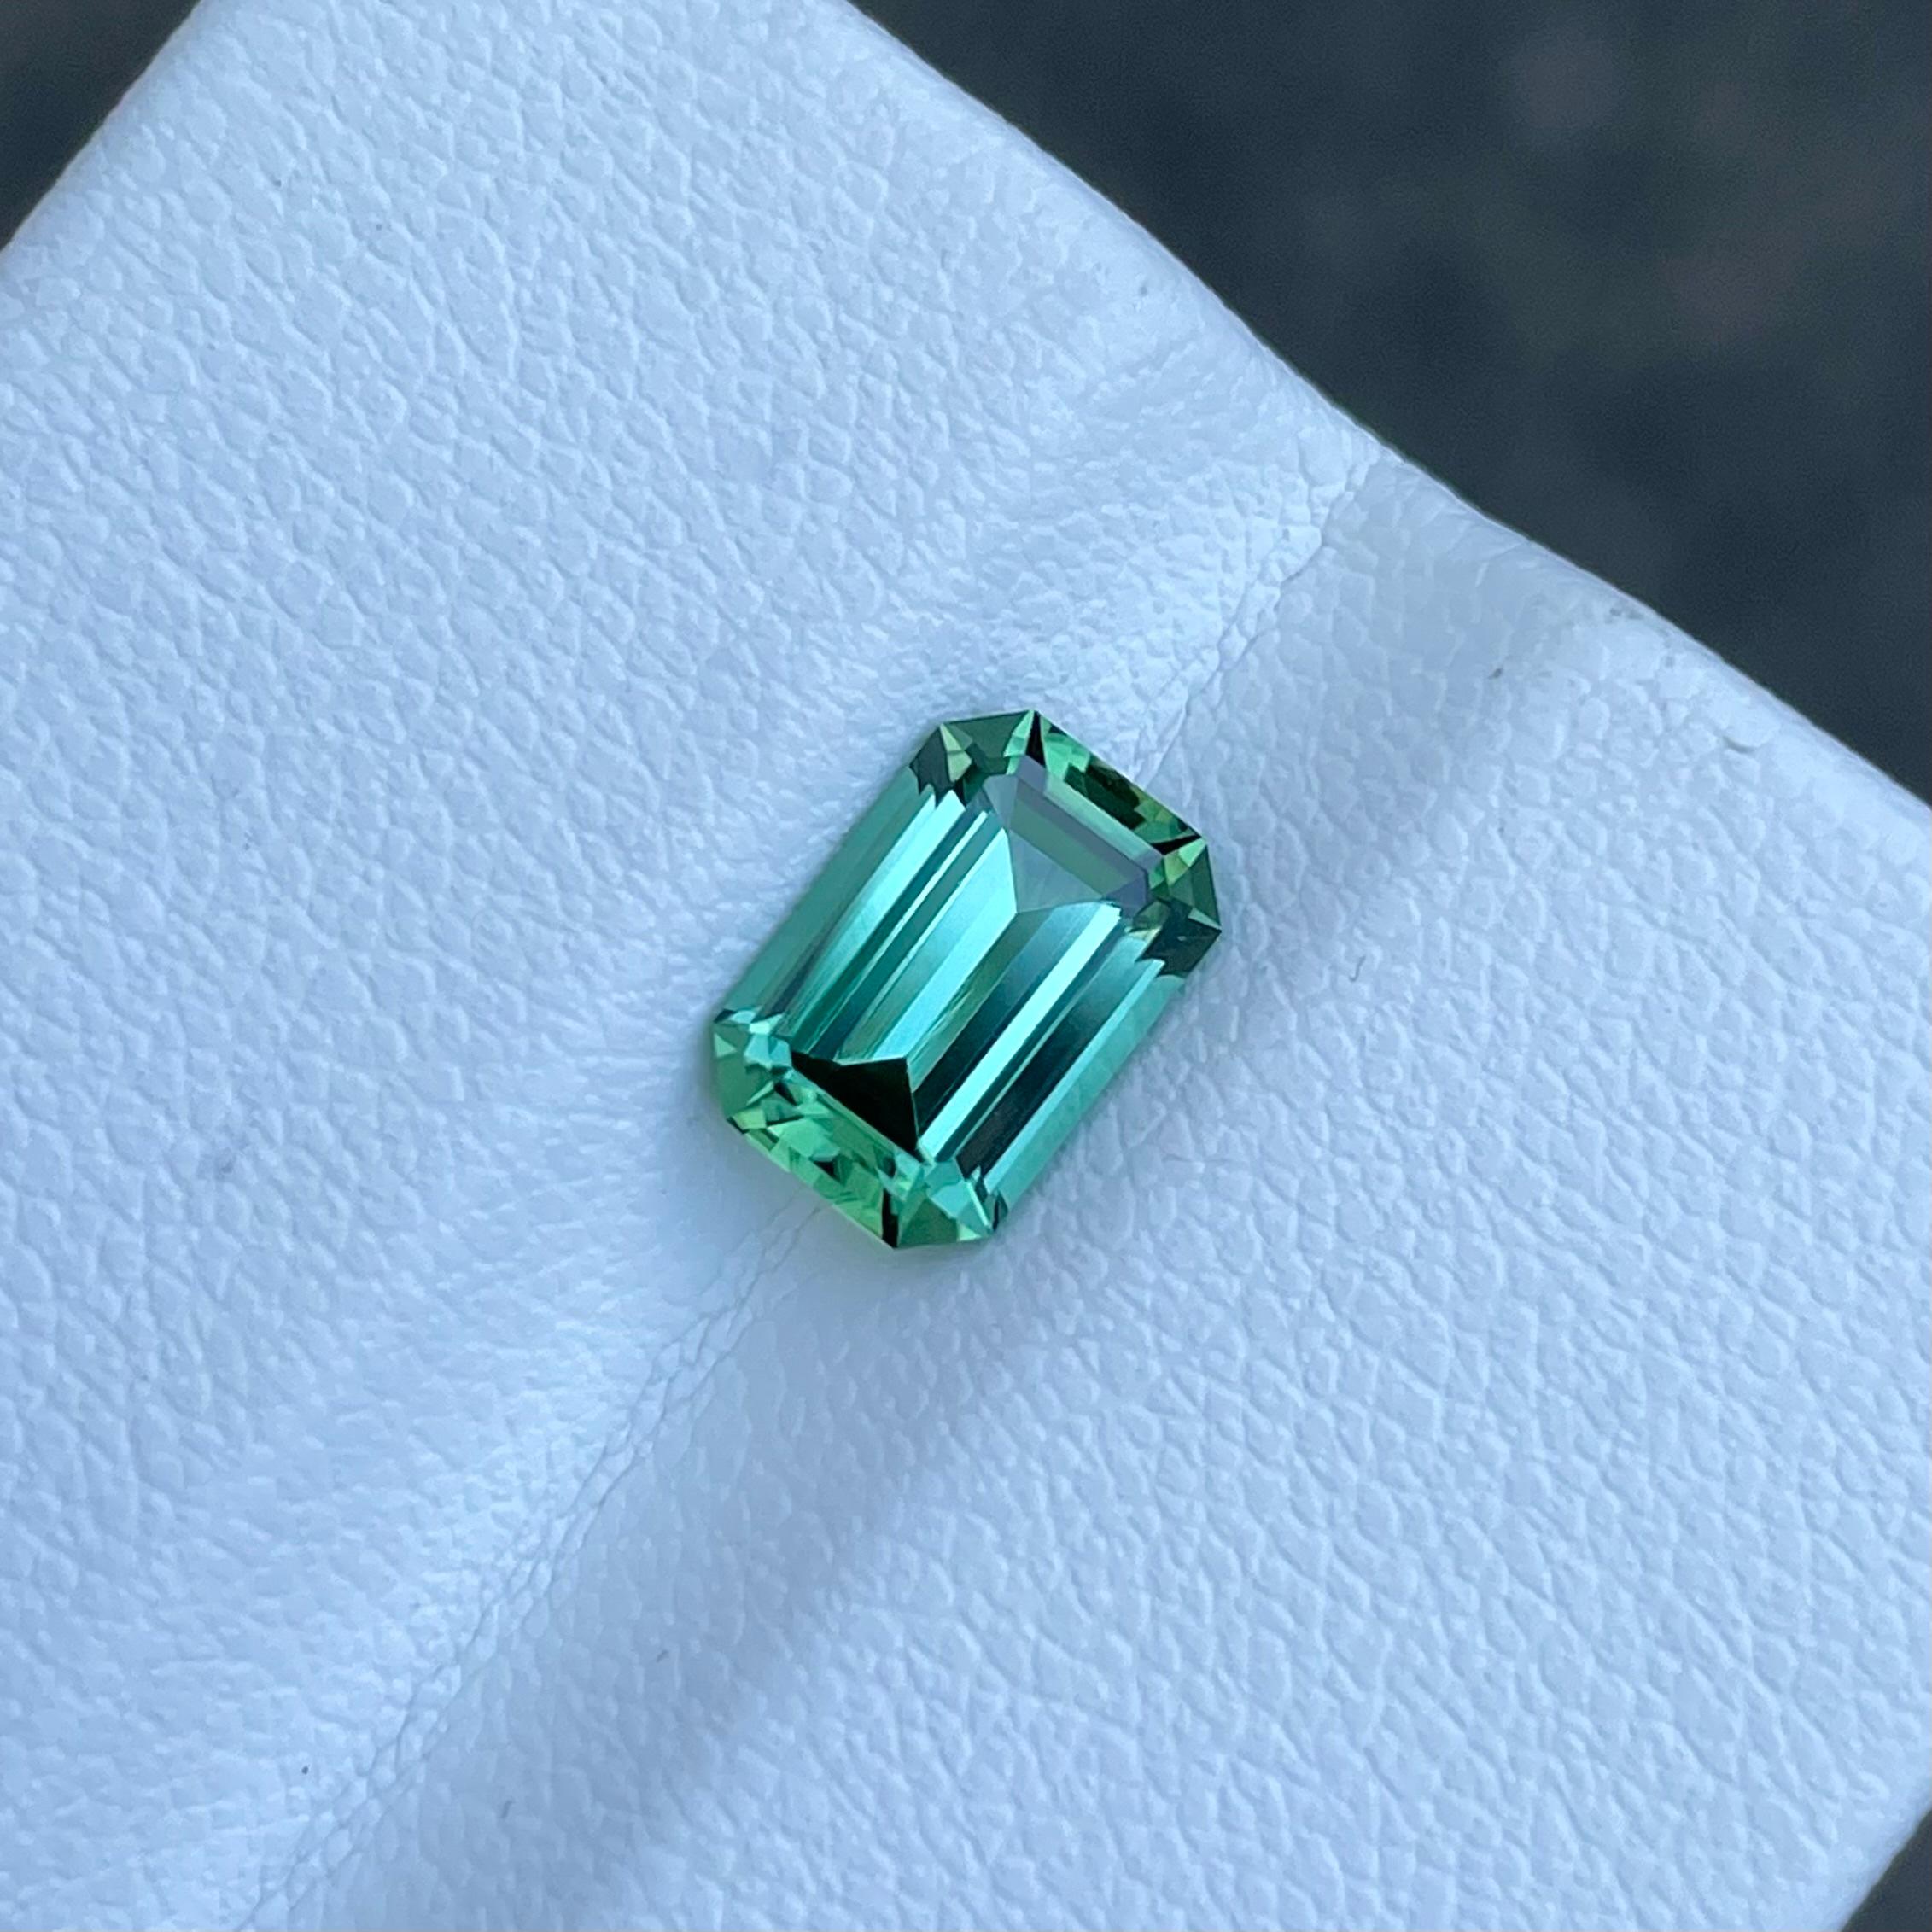 Weight 1.80 carats 
Dimensions 8.9x6.1x4.2 mm
Treatment none 
Origin Afghanistan 
Clarity loupe clean 
Shape octagon 
Cut emerald 




The Mint Green Tourmaline is a true marvel of nature, a gemstone that enchants with its unparalleled beauty. This